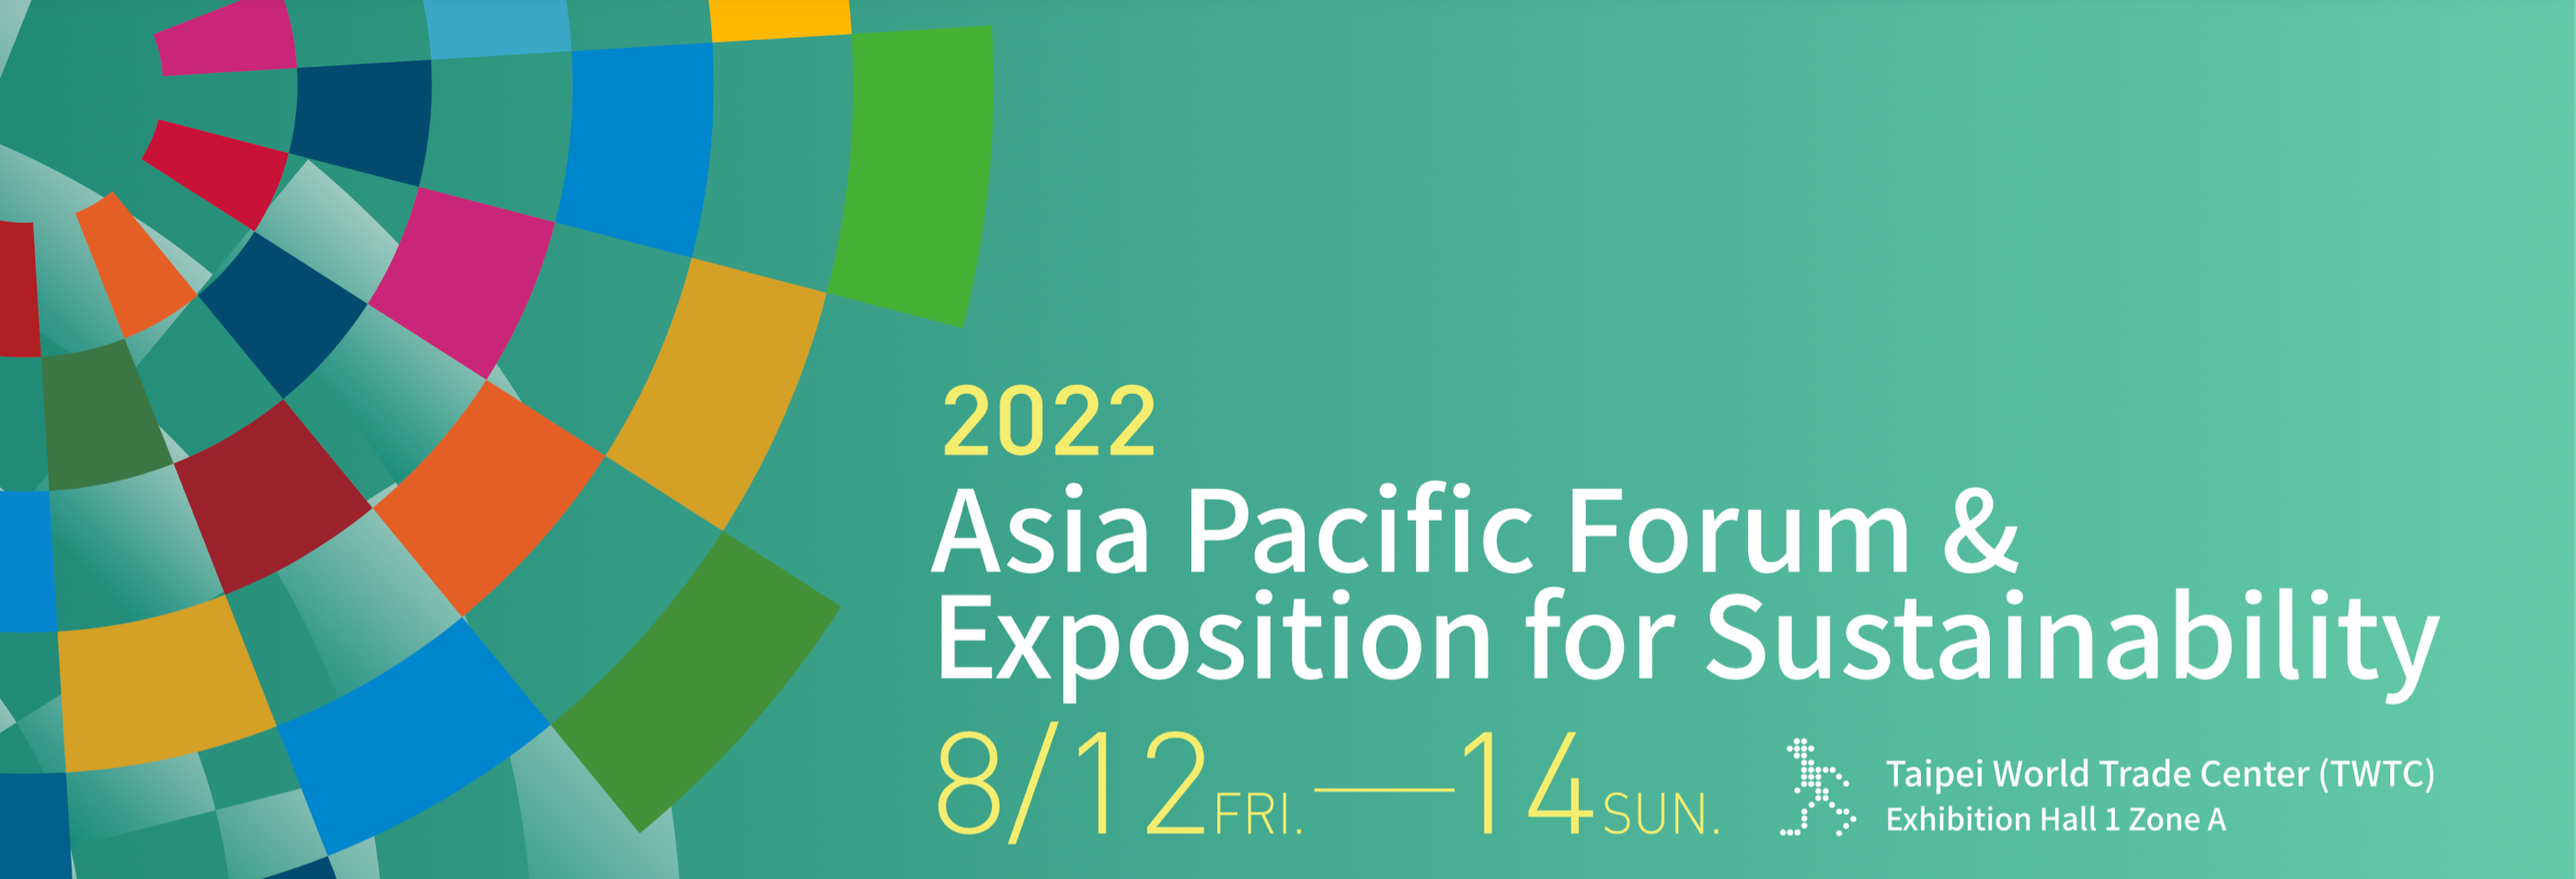 Nanpao will be attending the 2022 Asia Pacific Forum & Exposition for Sustainability from 8/12~8/14